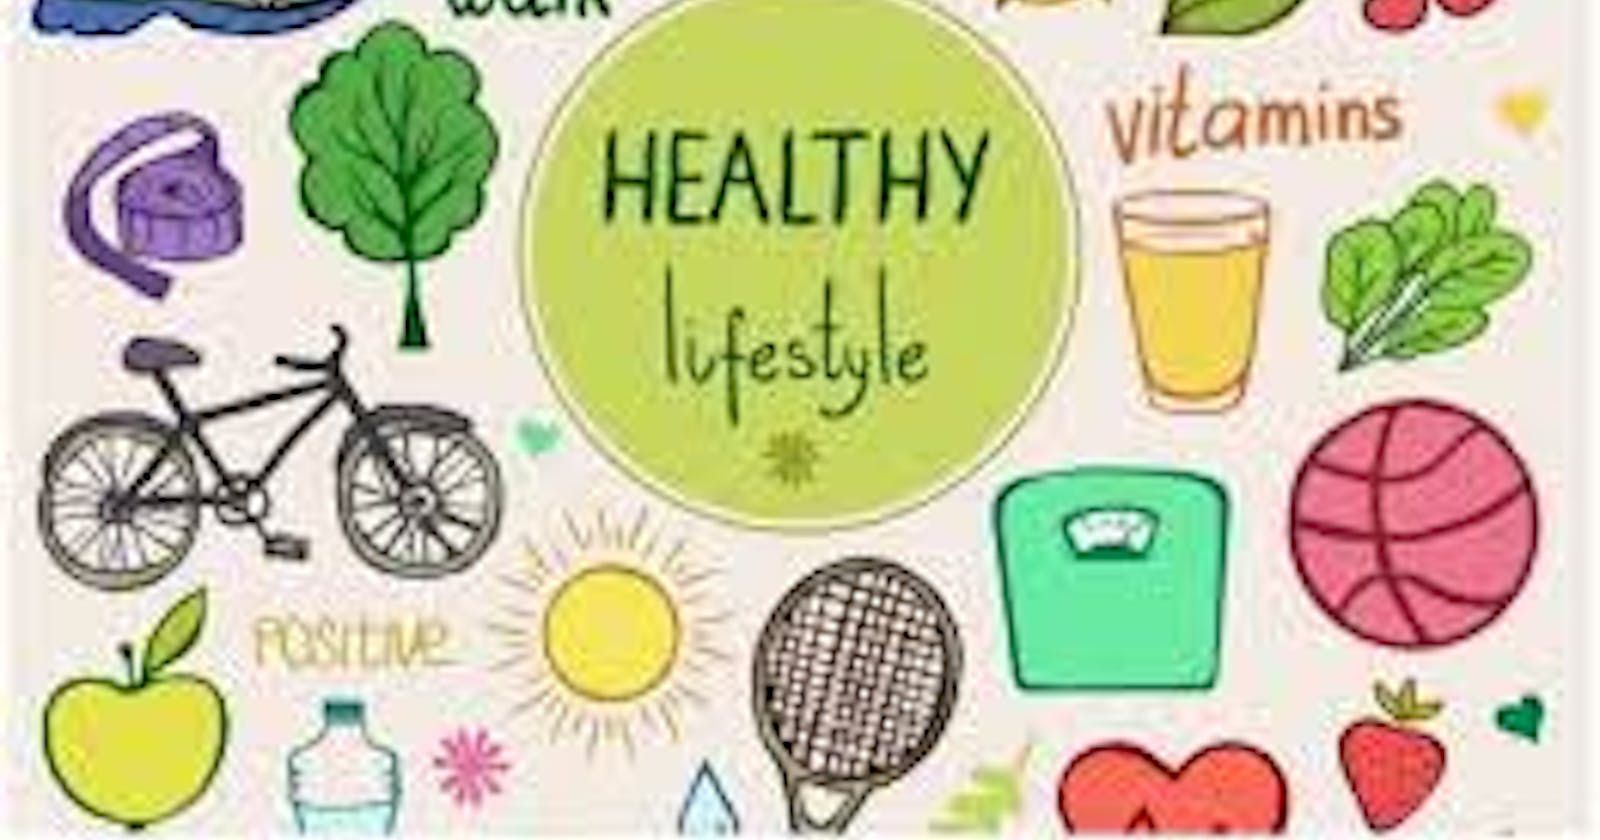 Tips for Healthy Lifestyle